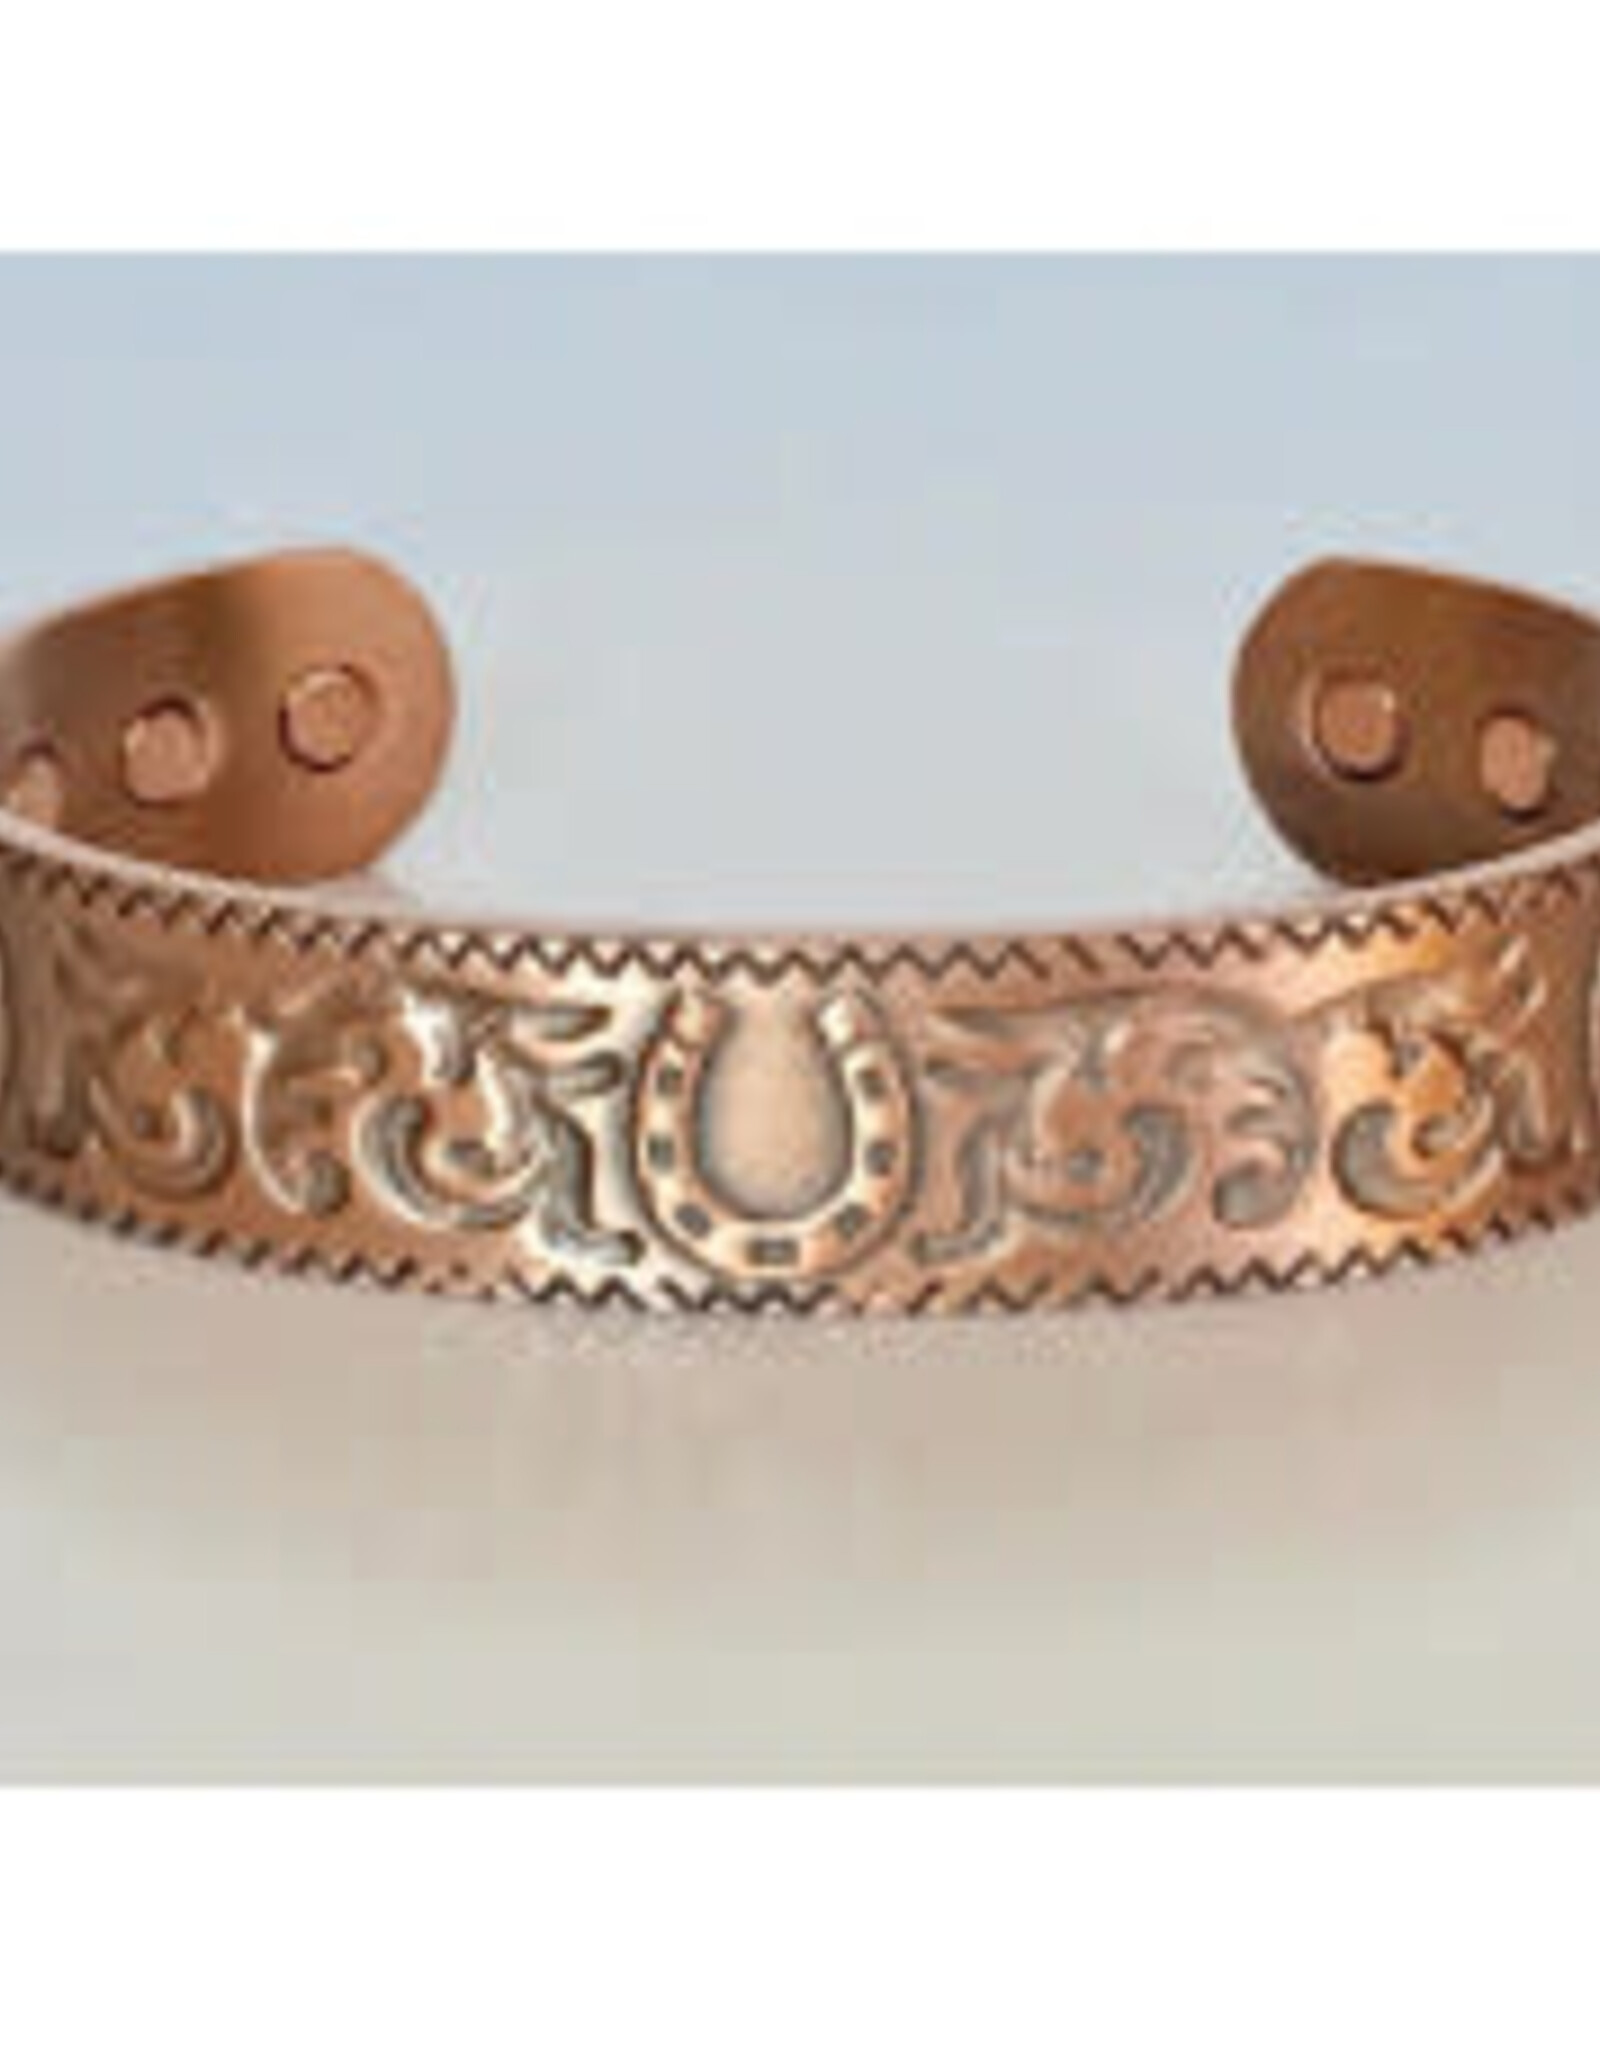 Copper cuff bracelet with magnets horseshoe